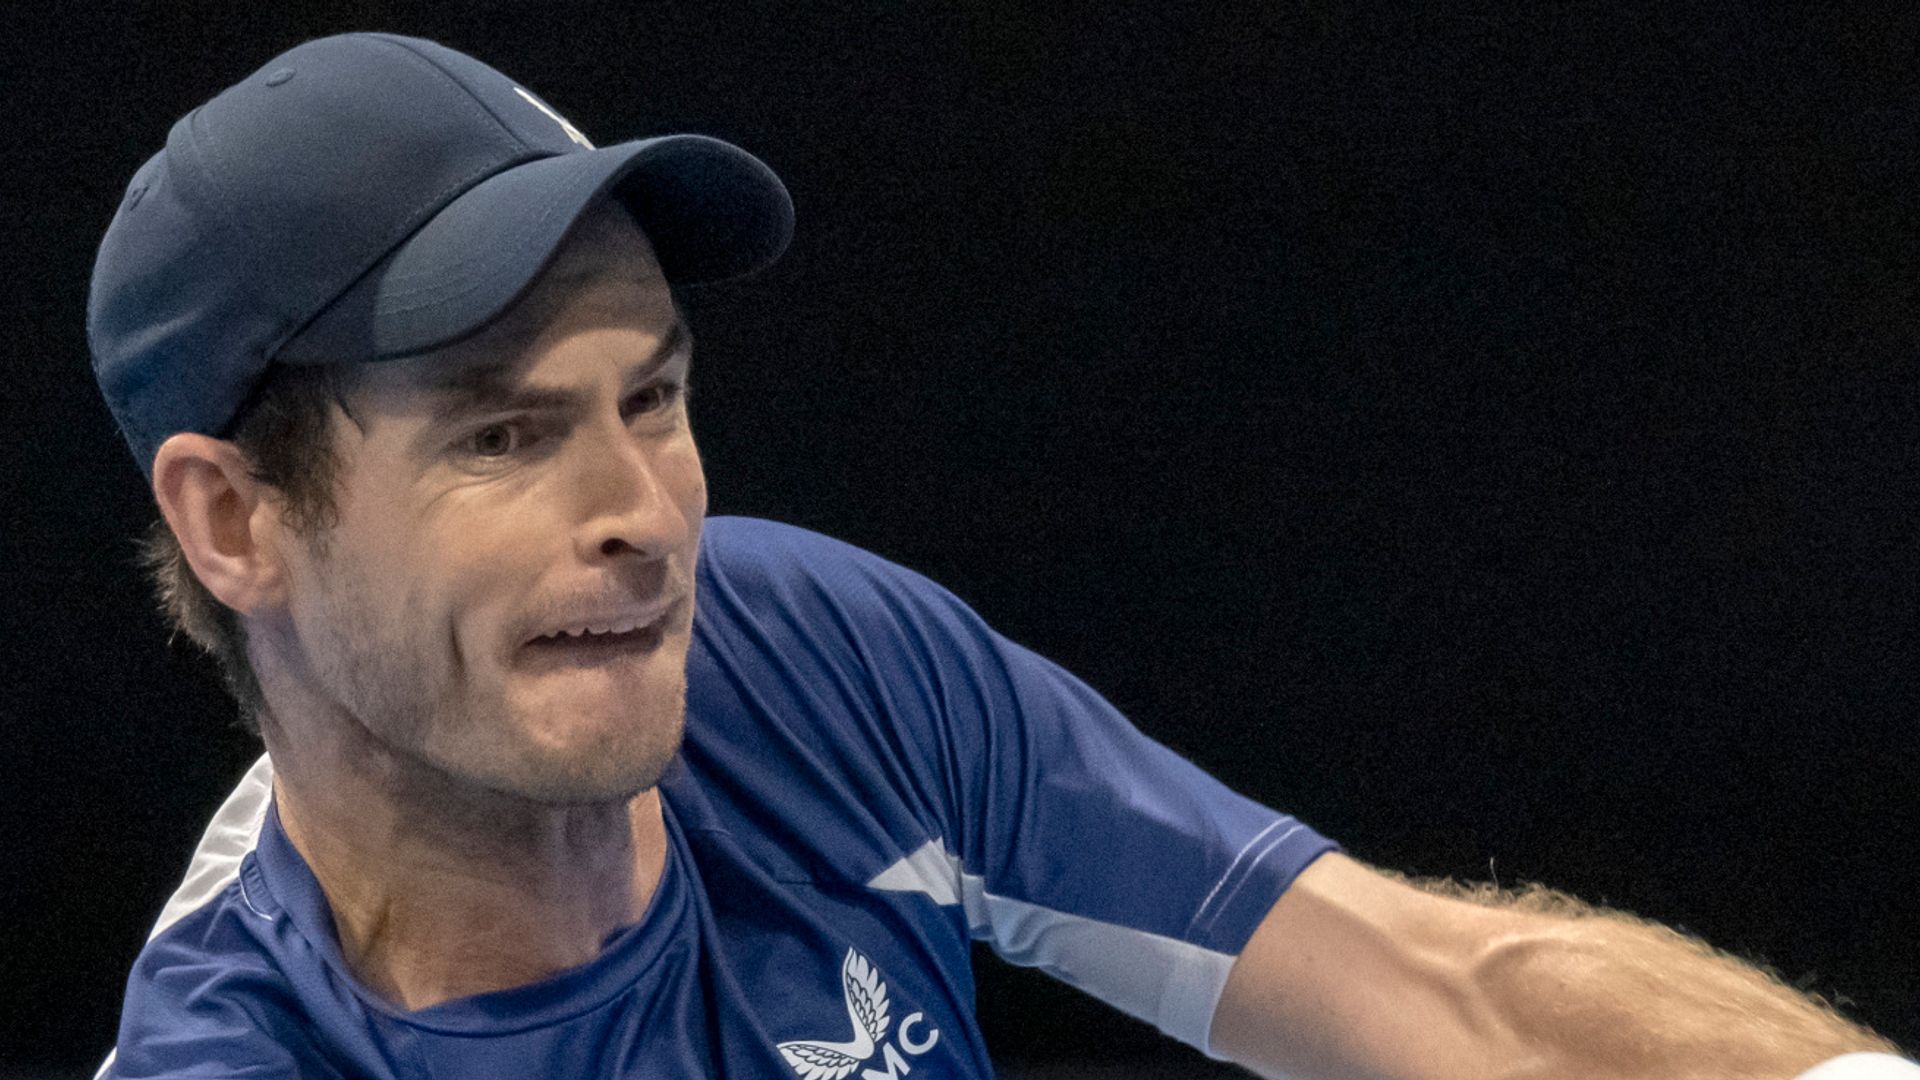 Murray beaten by Bautista Agut in Basel | Norrie crashes out in Vienna